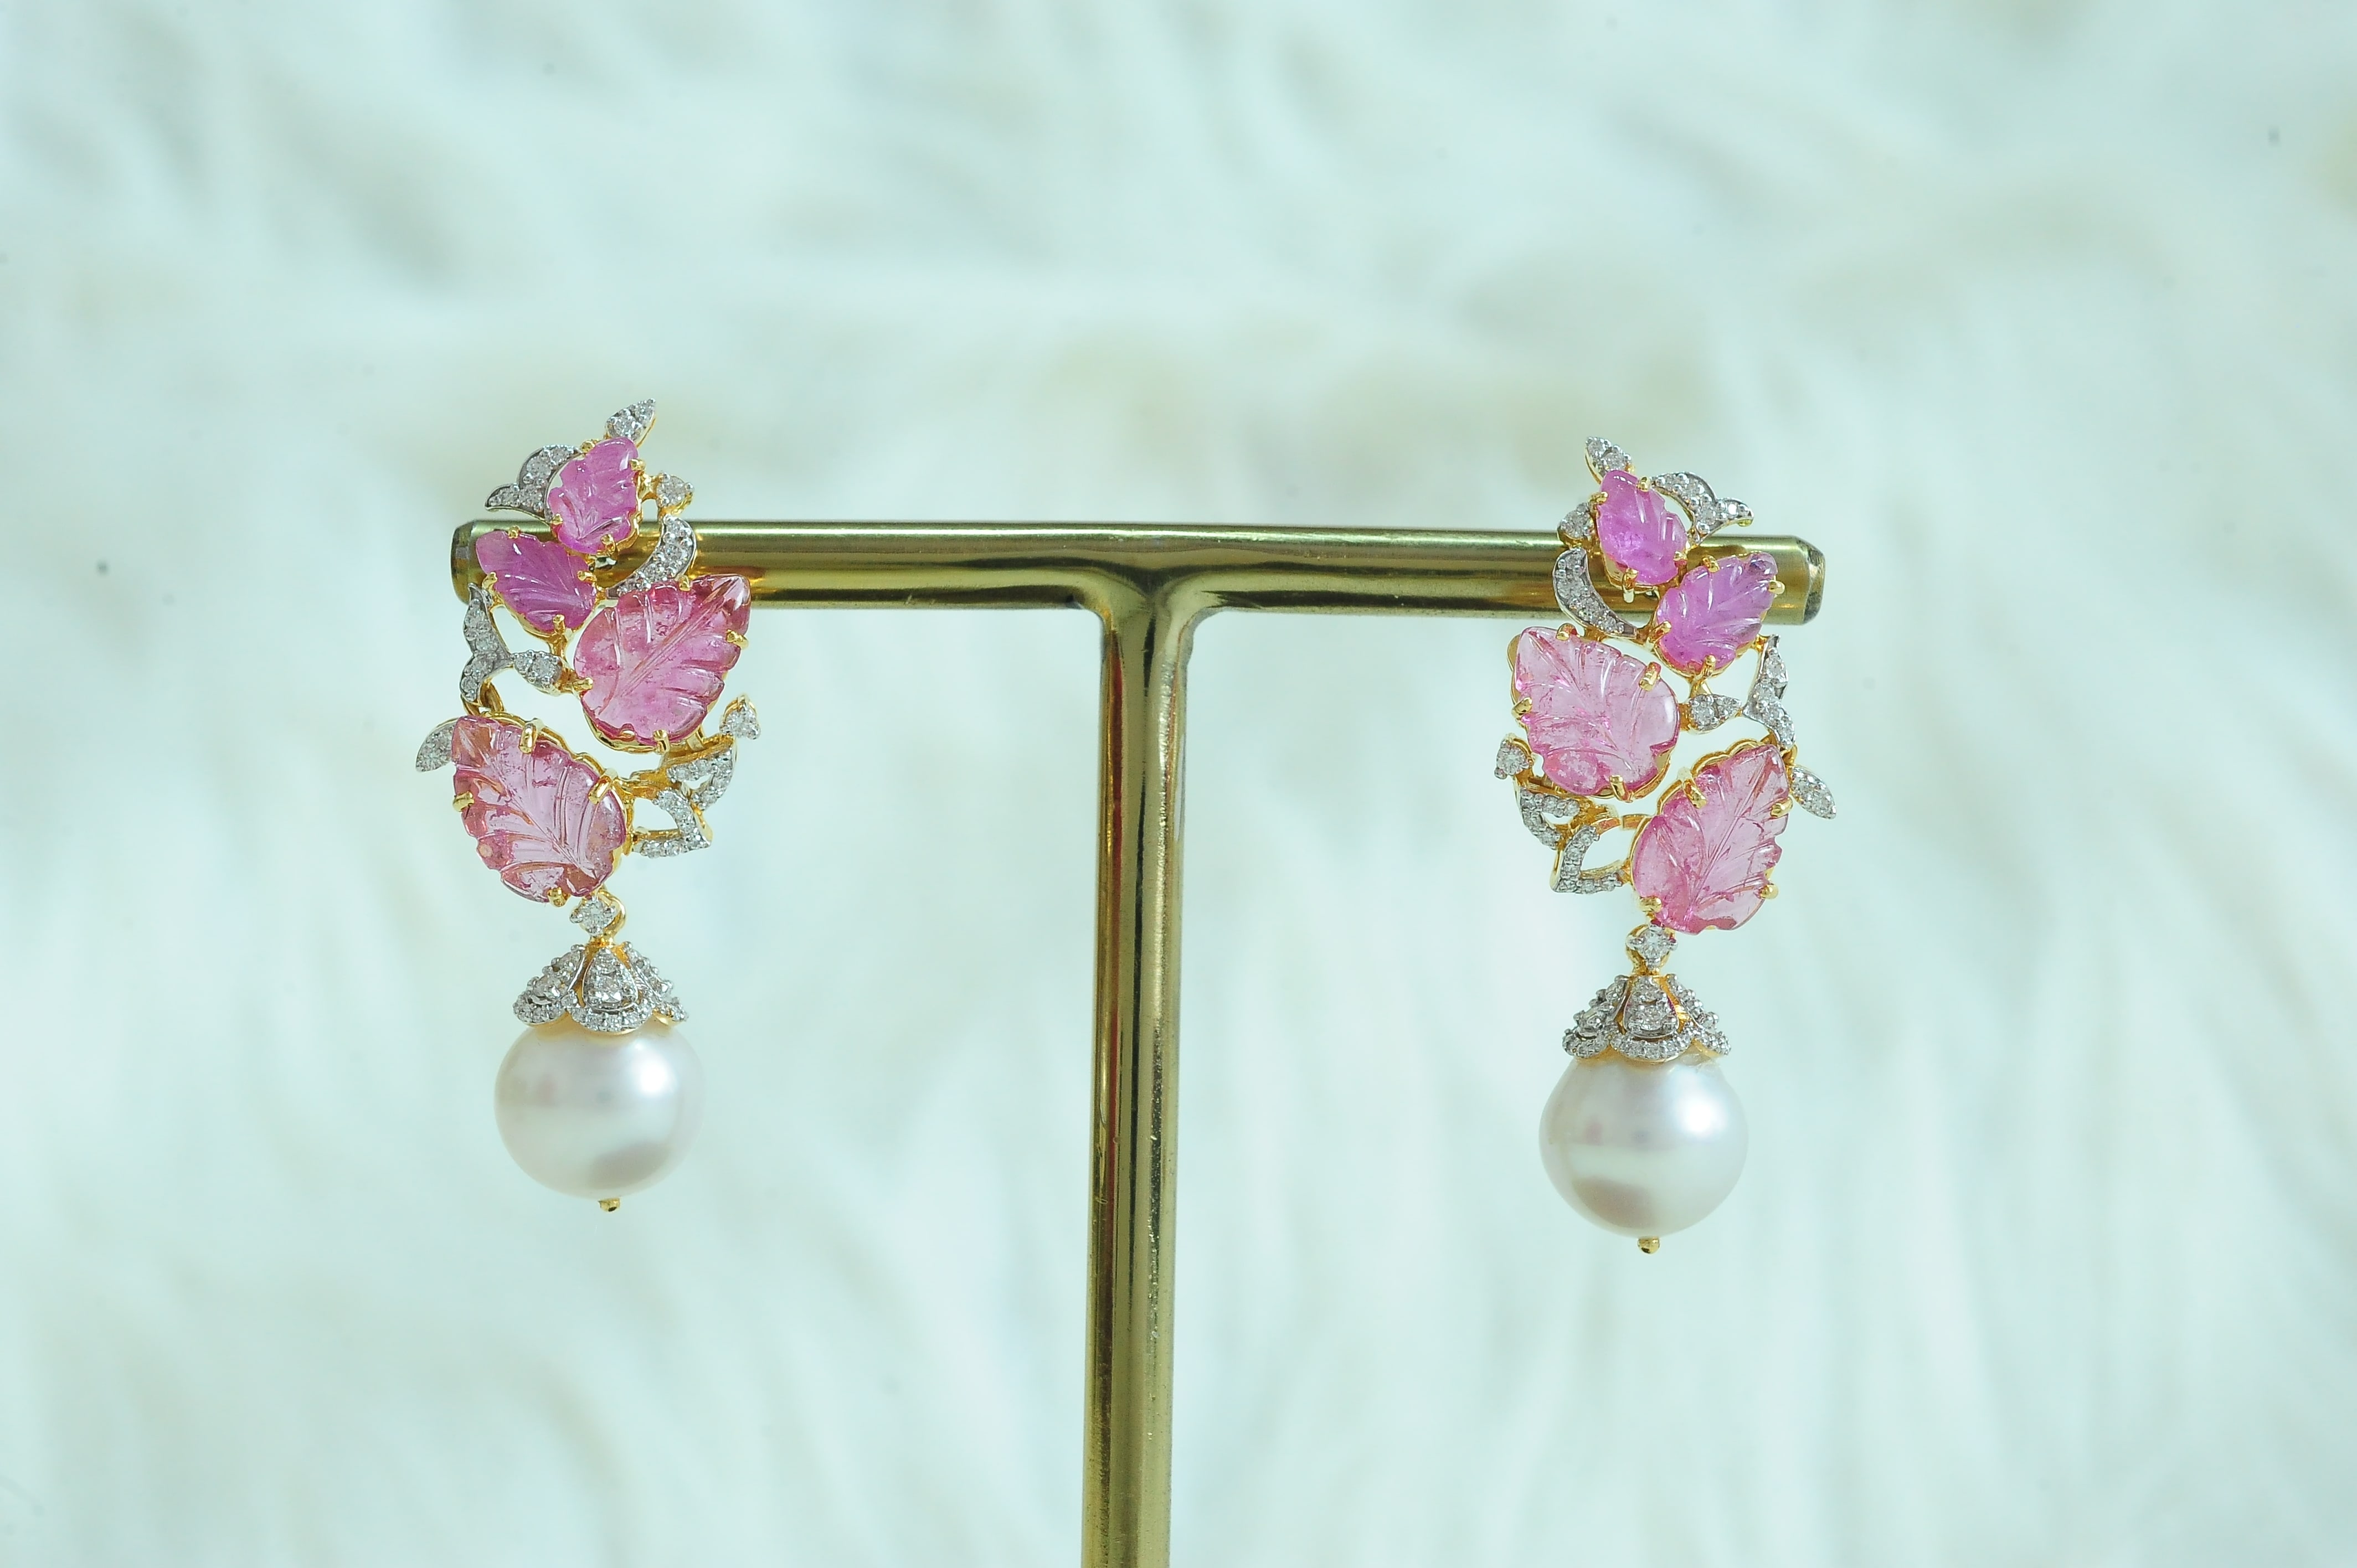 Leaf Design Diamond Earrings with Natural Tourmaline and Pearl Drops